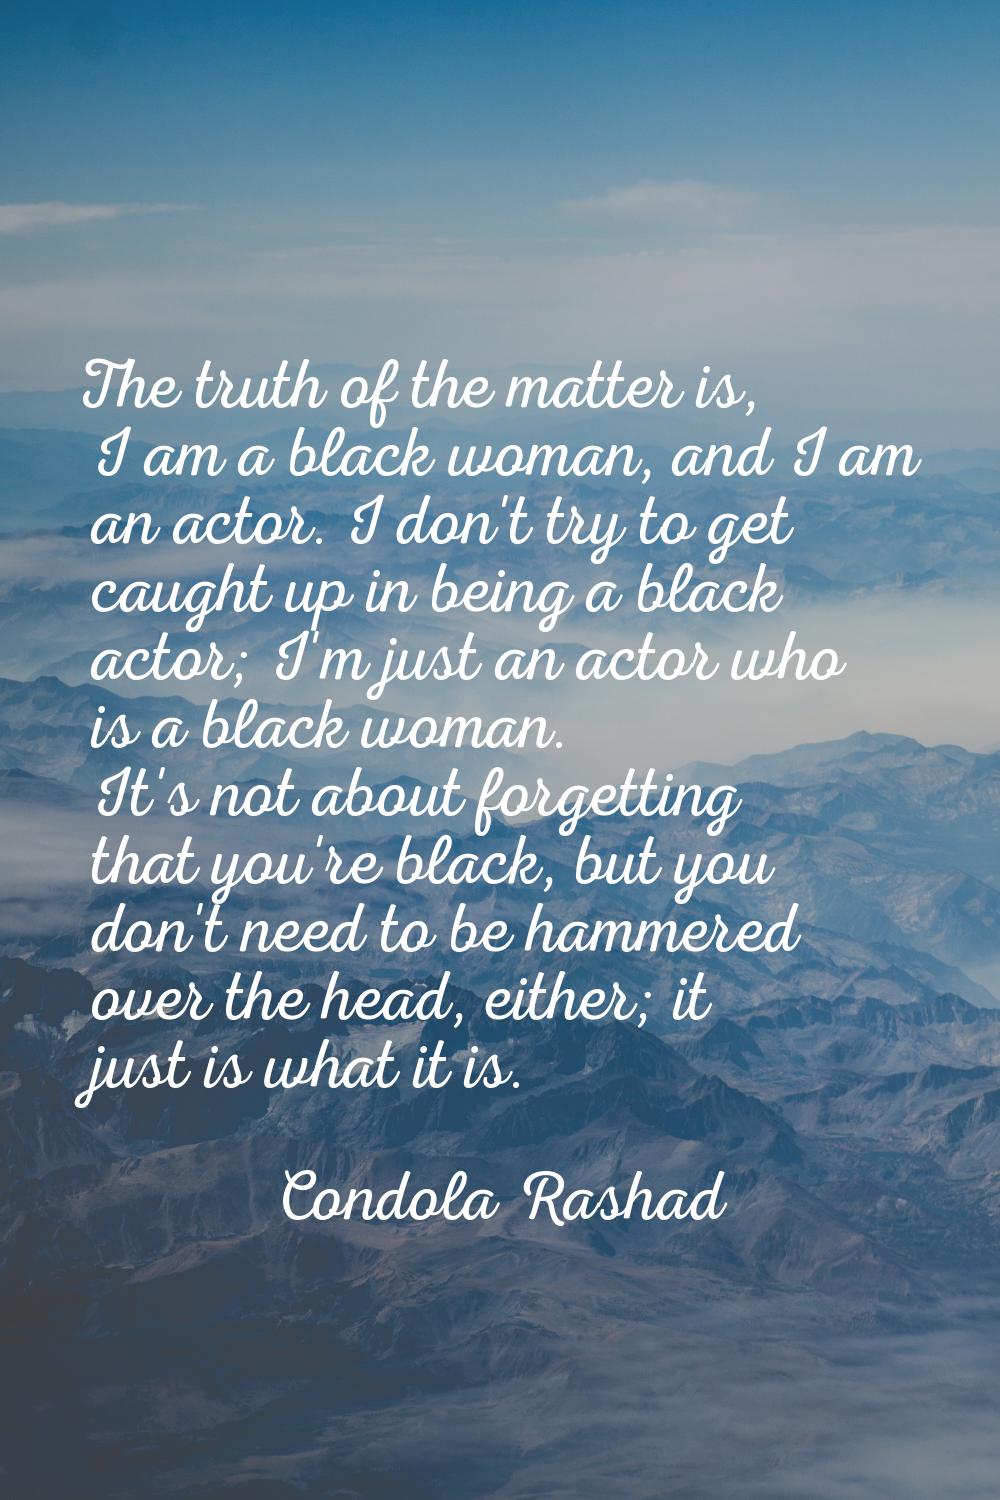 The truth of the matter is, I am a black woman, and I am an actor. I don't try to get caught up in 